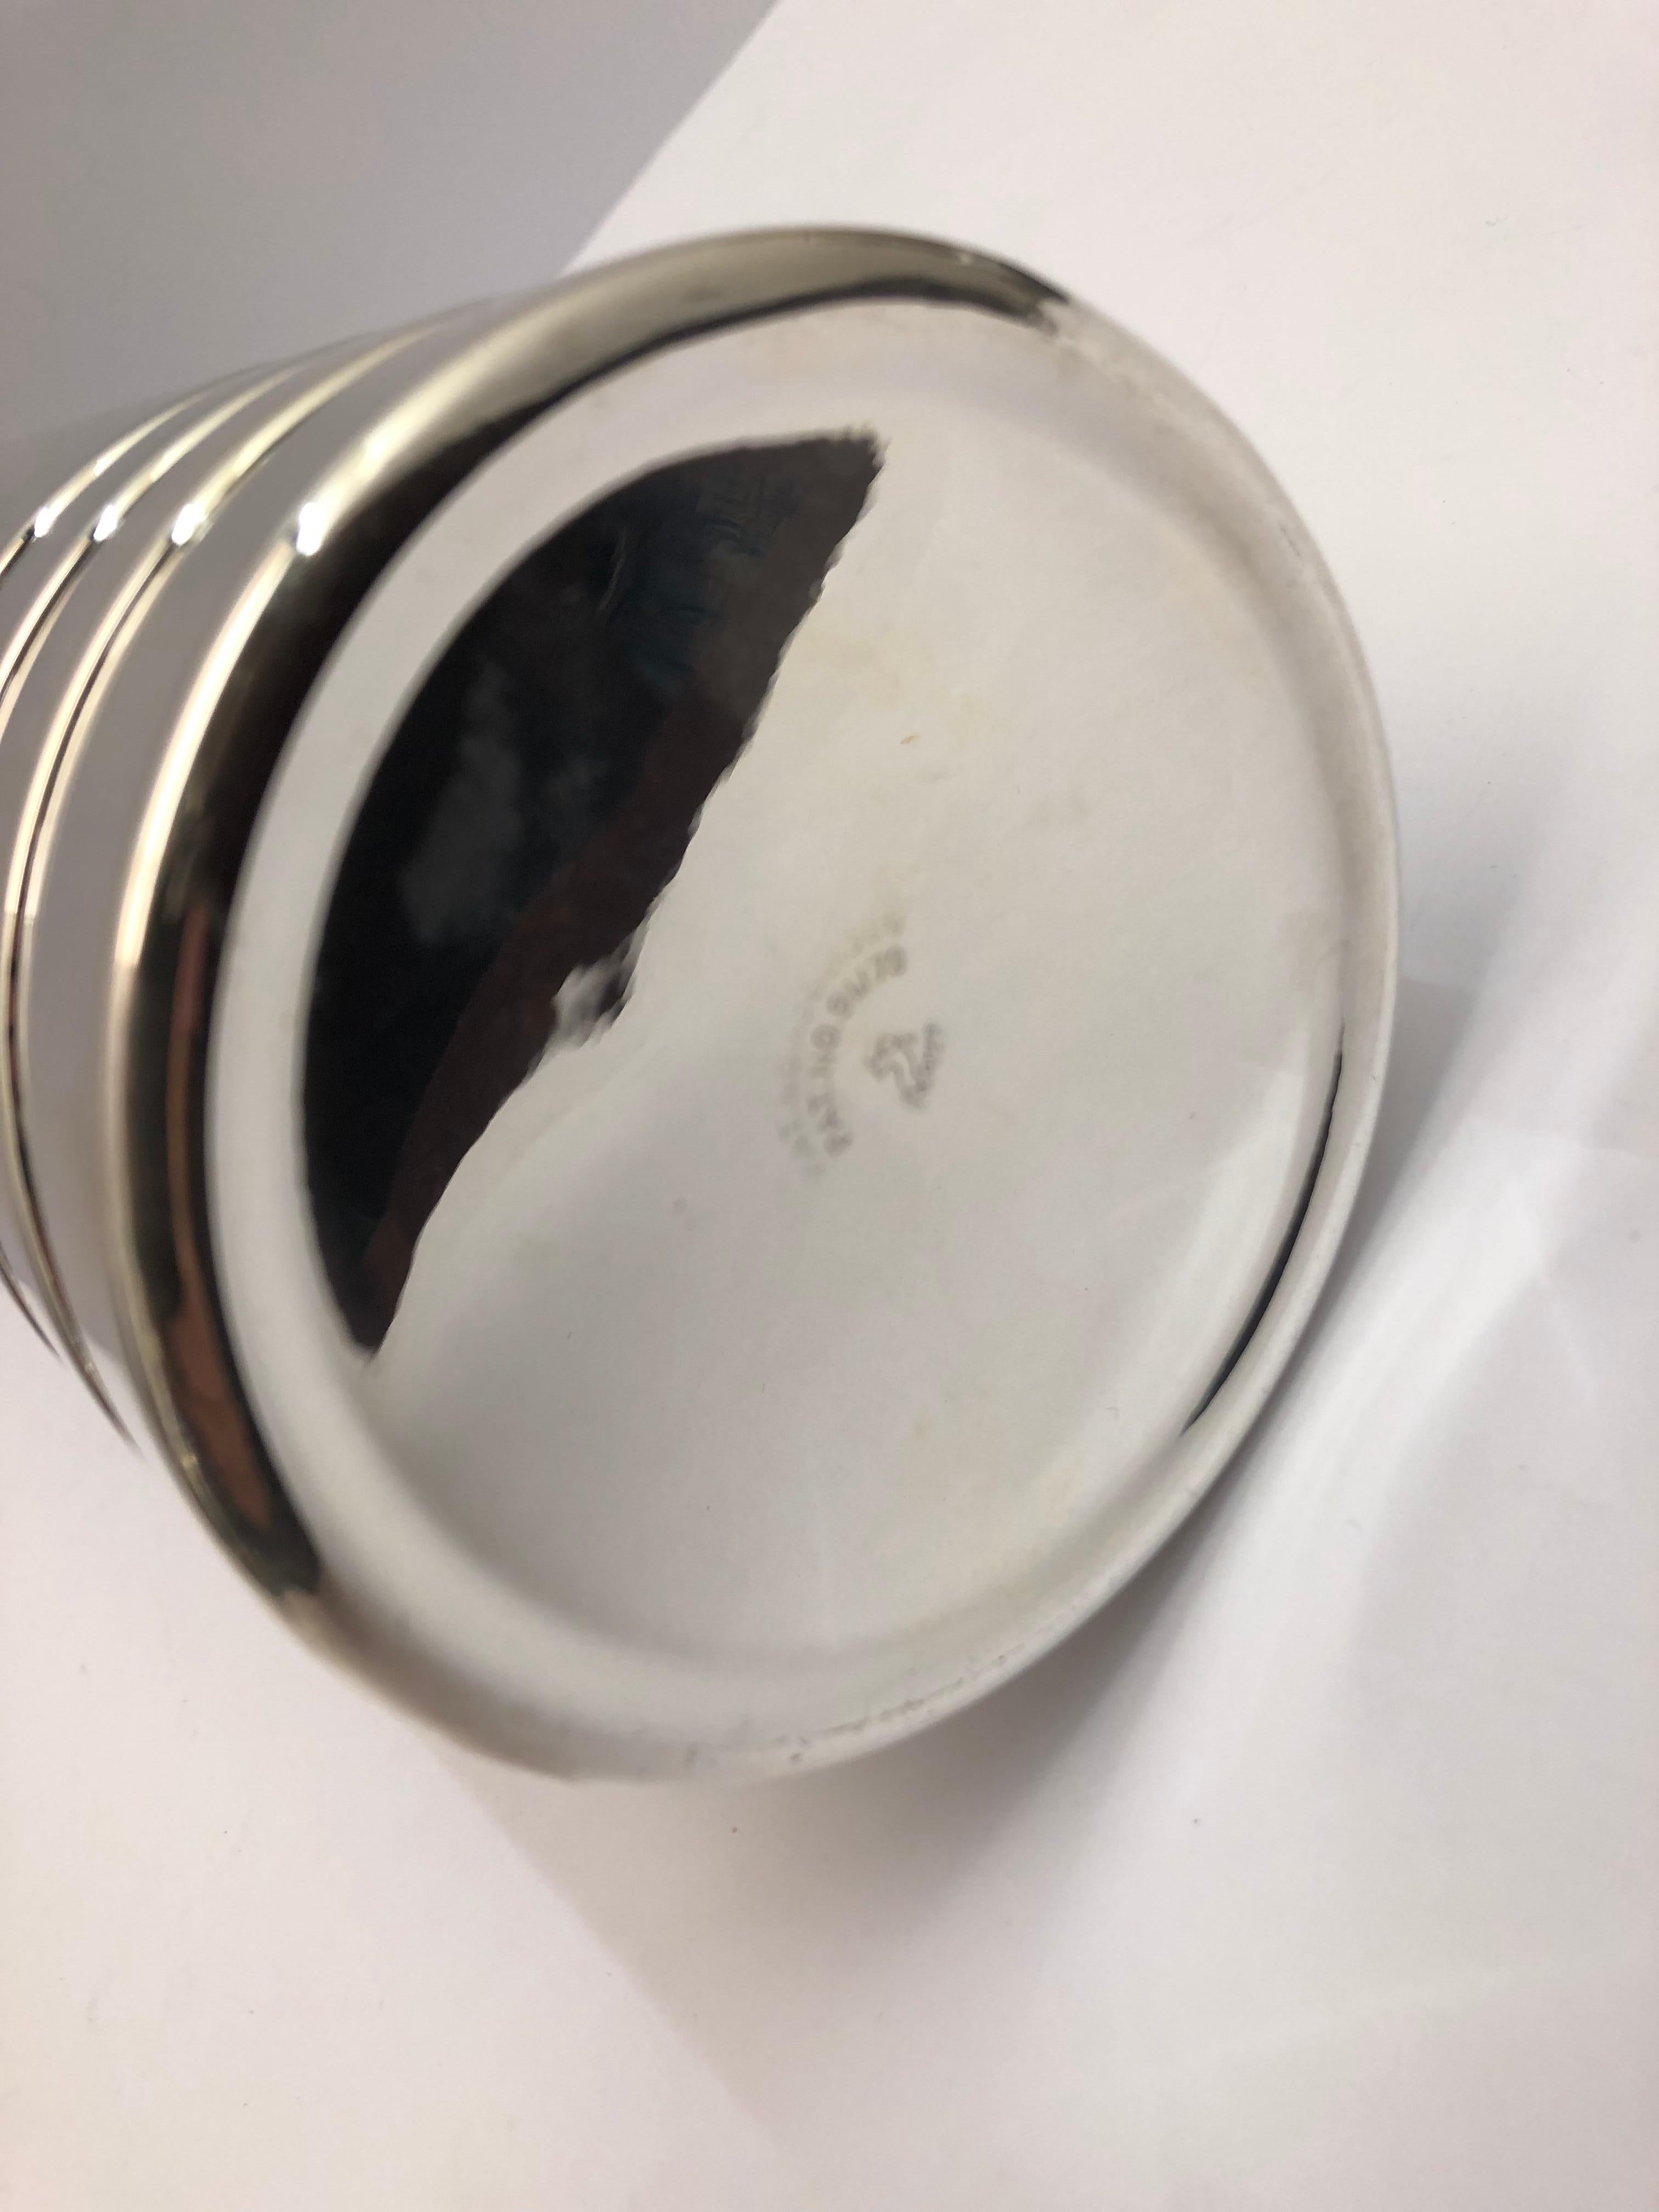 Silver Plate Cocktail Shaker In Good Condition For Sale In London, London